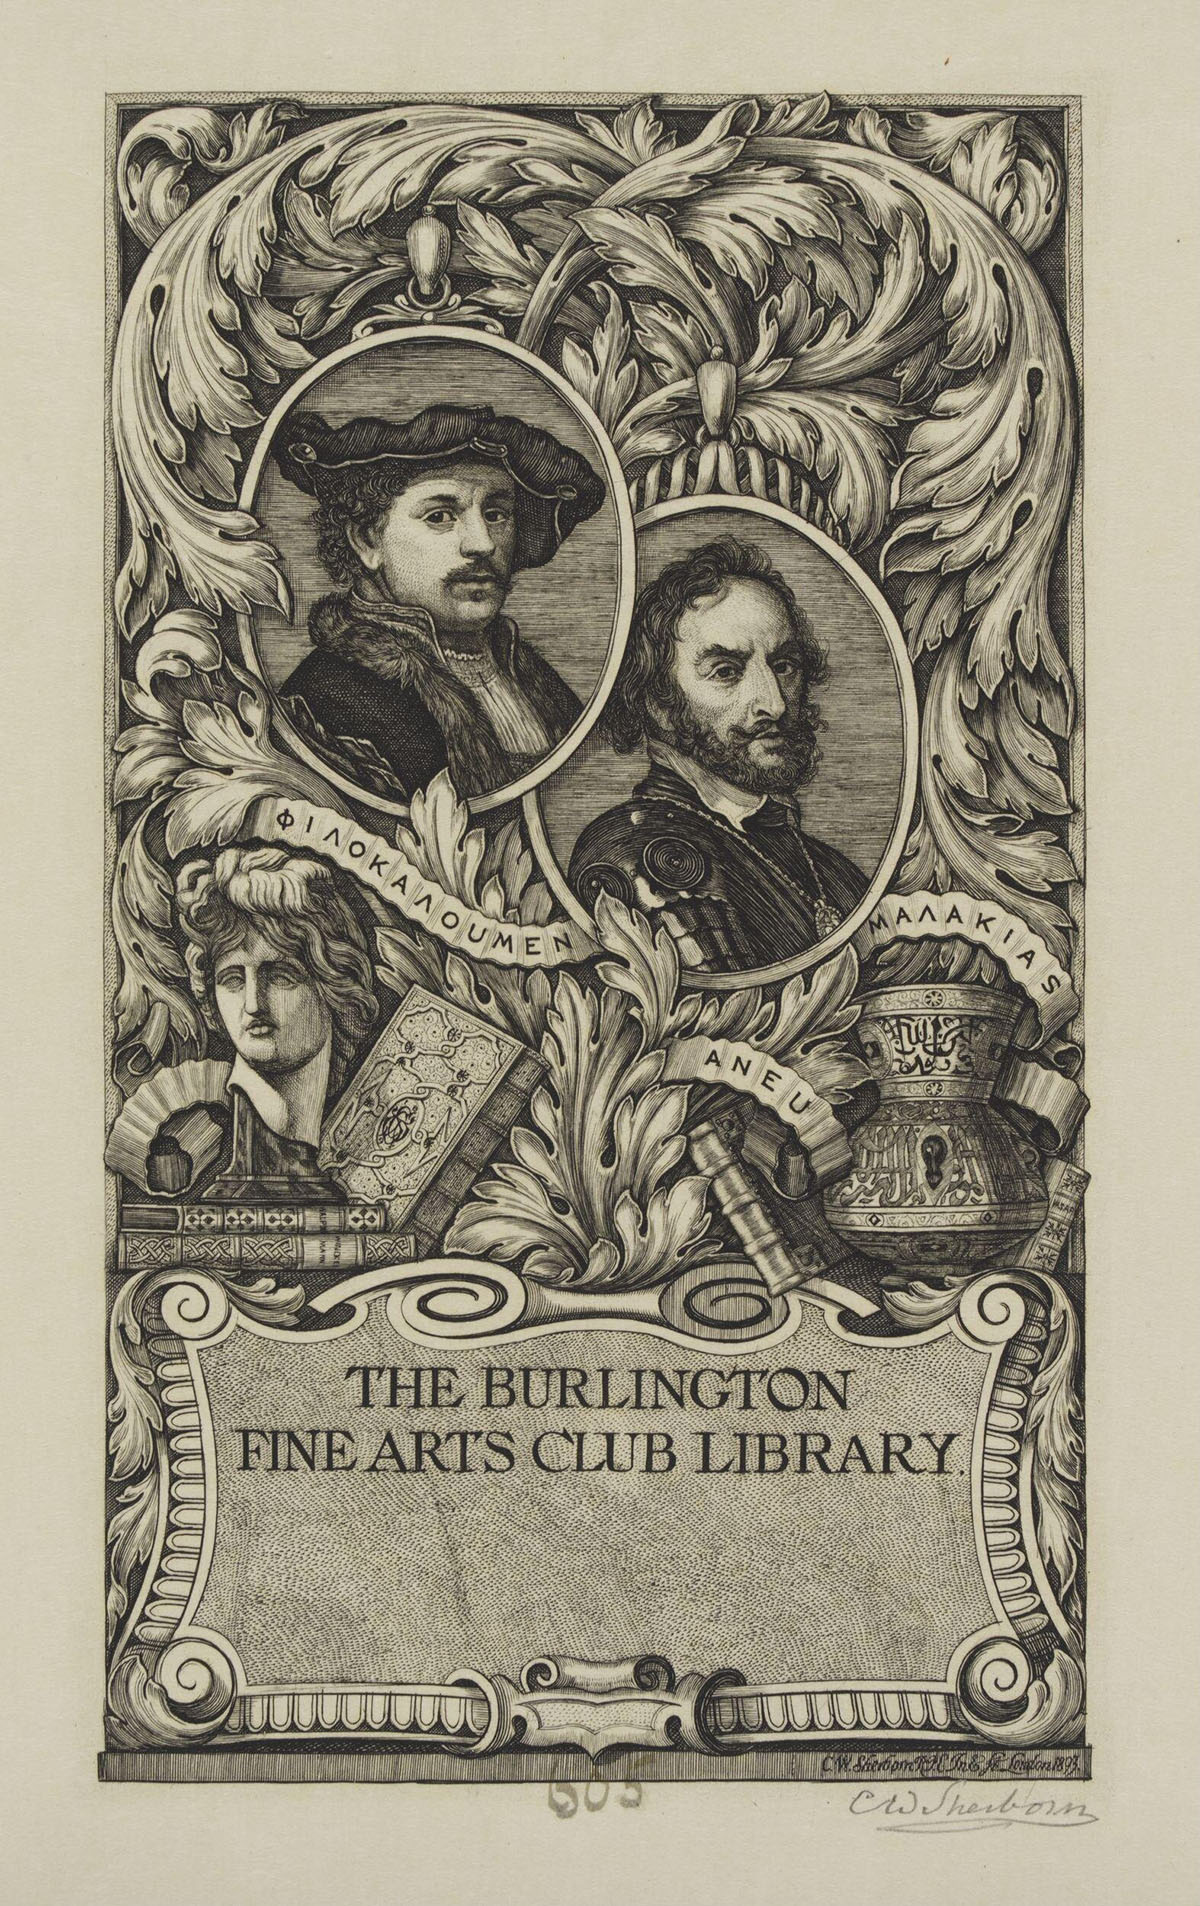 Illustrated book plate with portraits of two men looking out from the page. They are surrounded by ornate foliage.